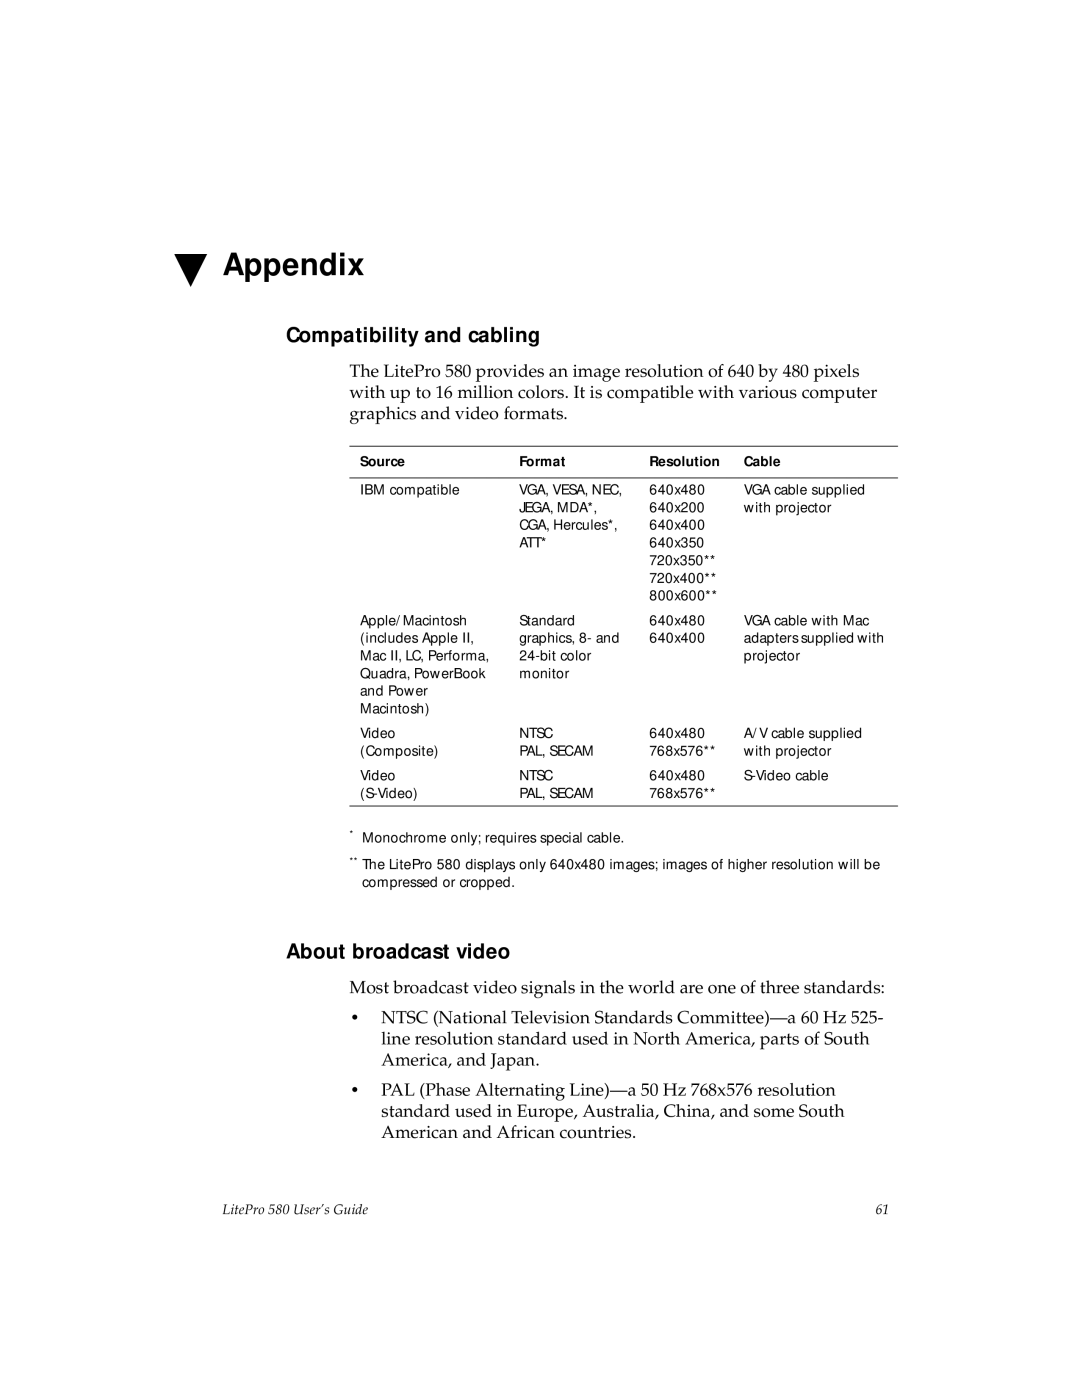 Hubbell 580 manual Appendix, Compatibility and cabling, About broadcast video 